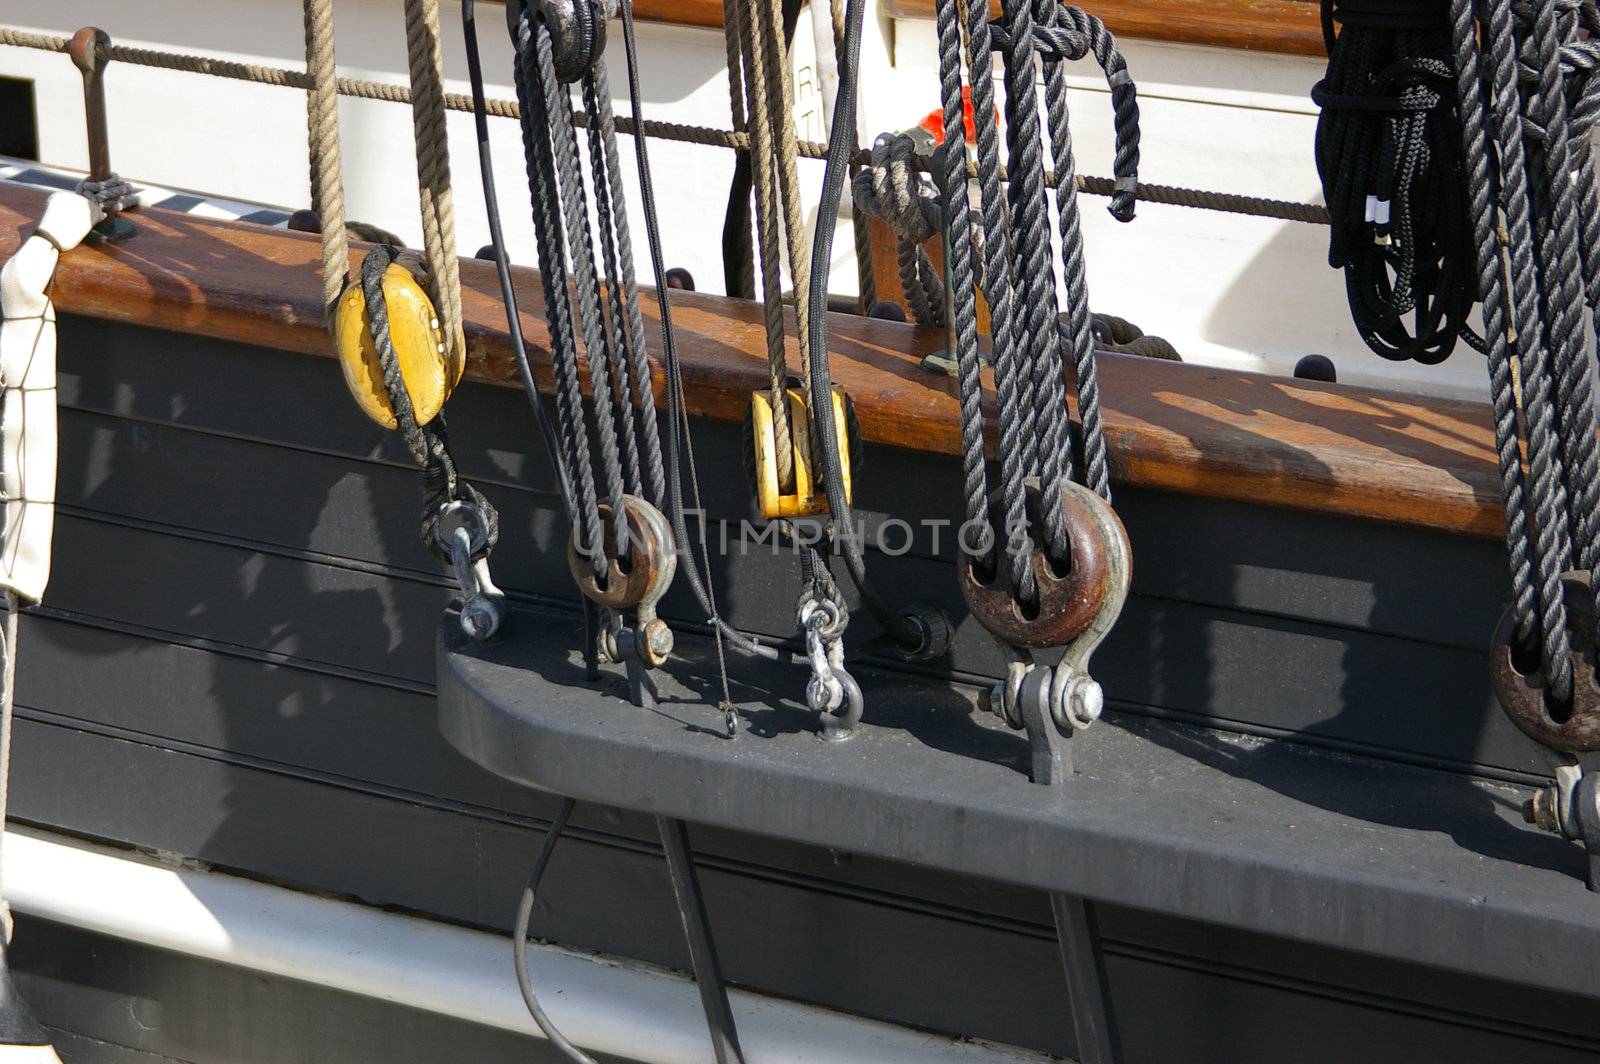 Blocks and Rigging by thomasw